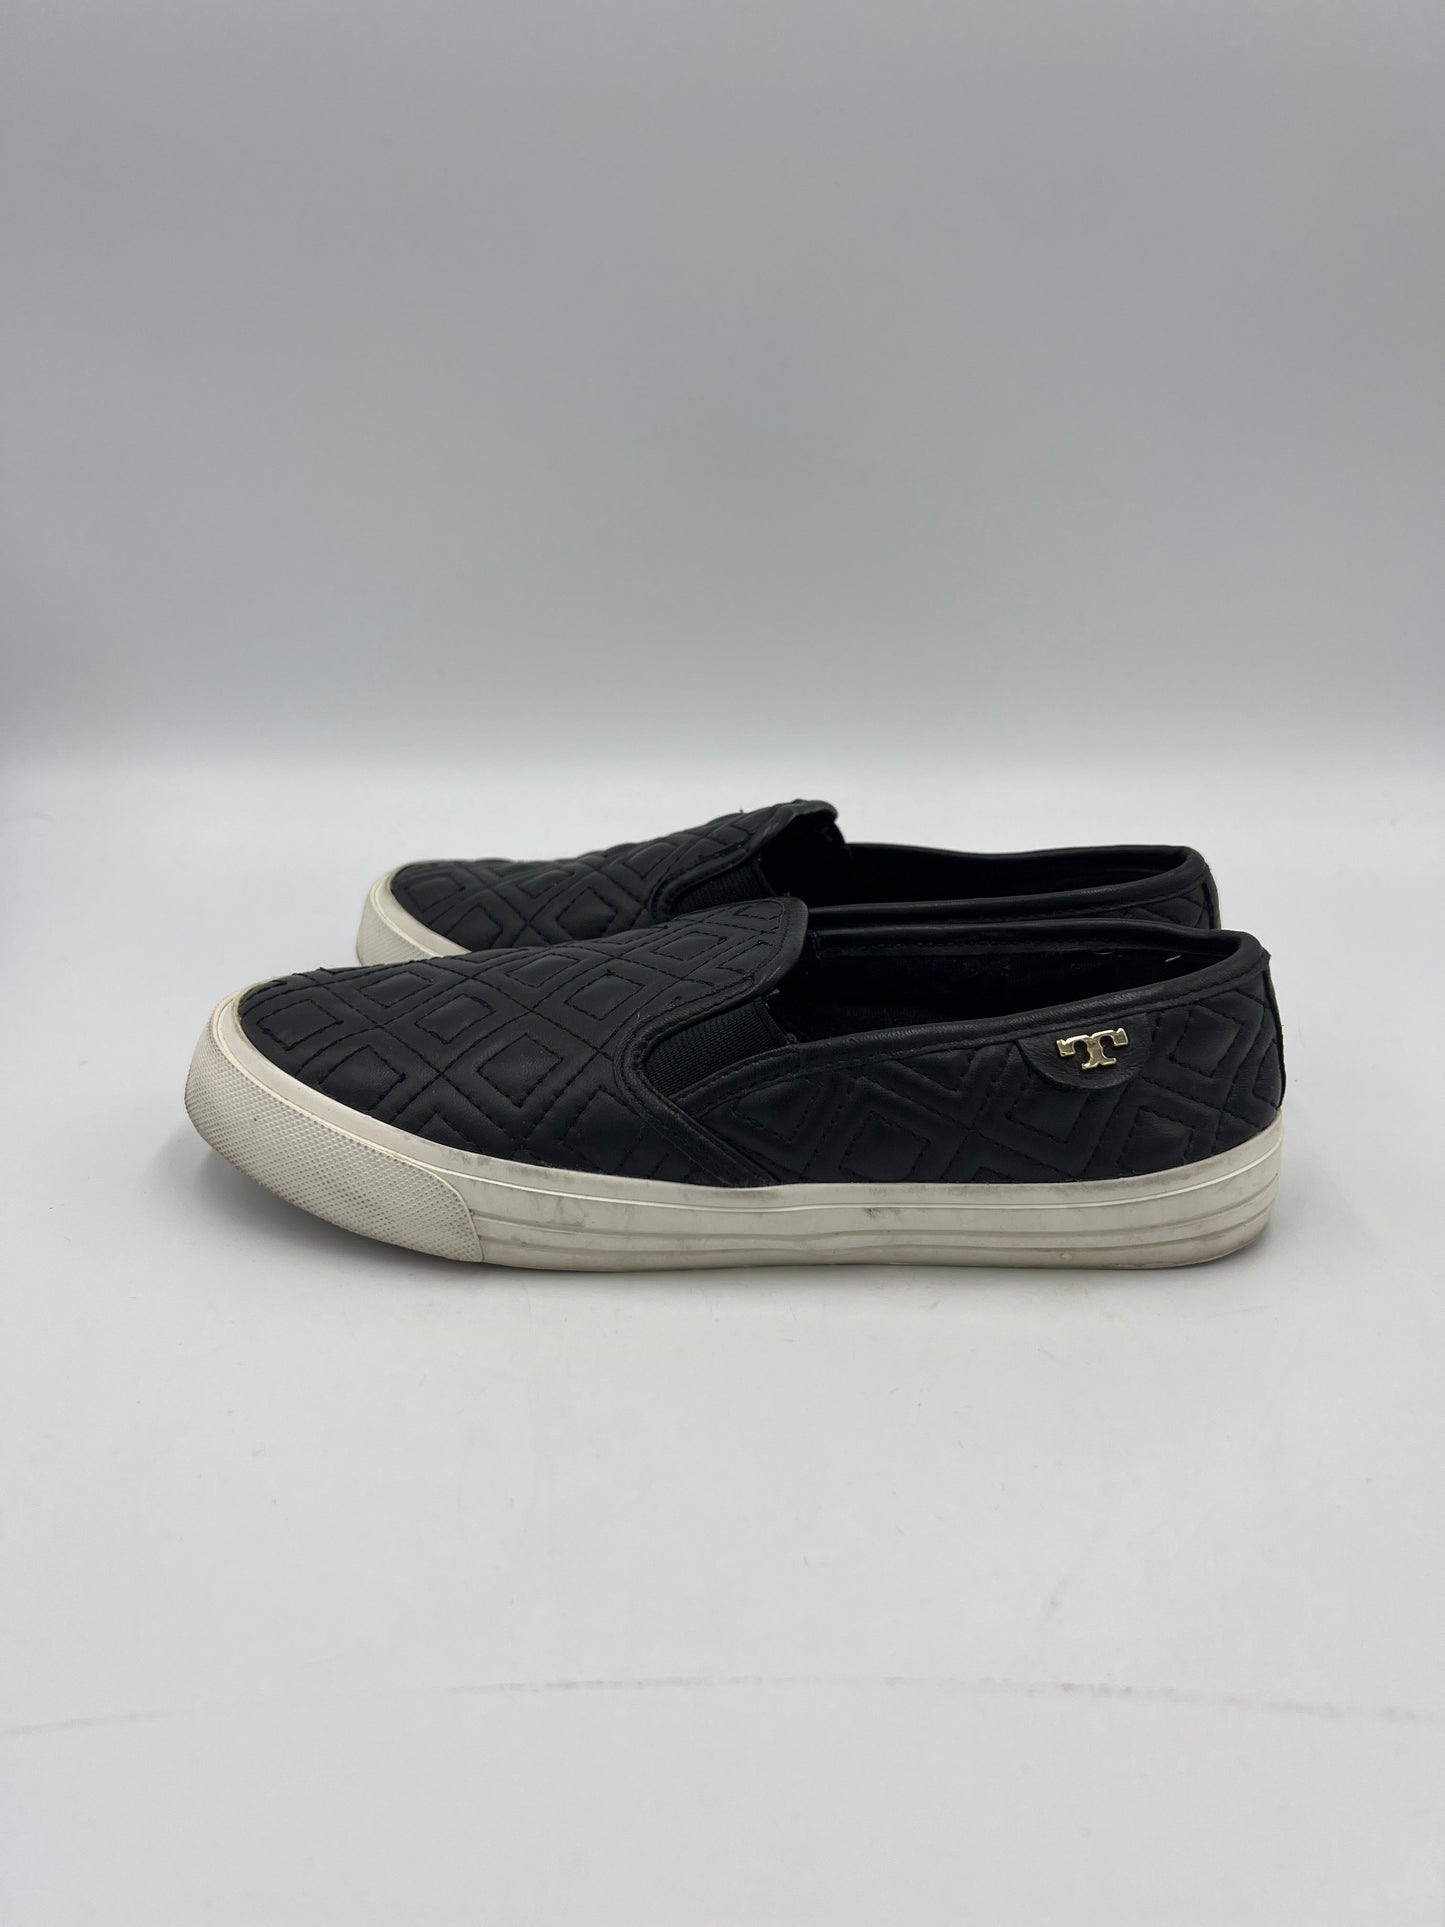 Shoes Designer By Tory Burch  Size: 6.5